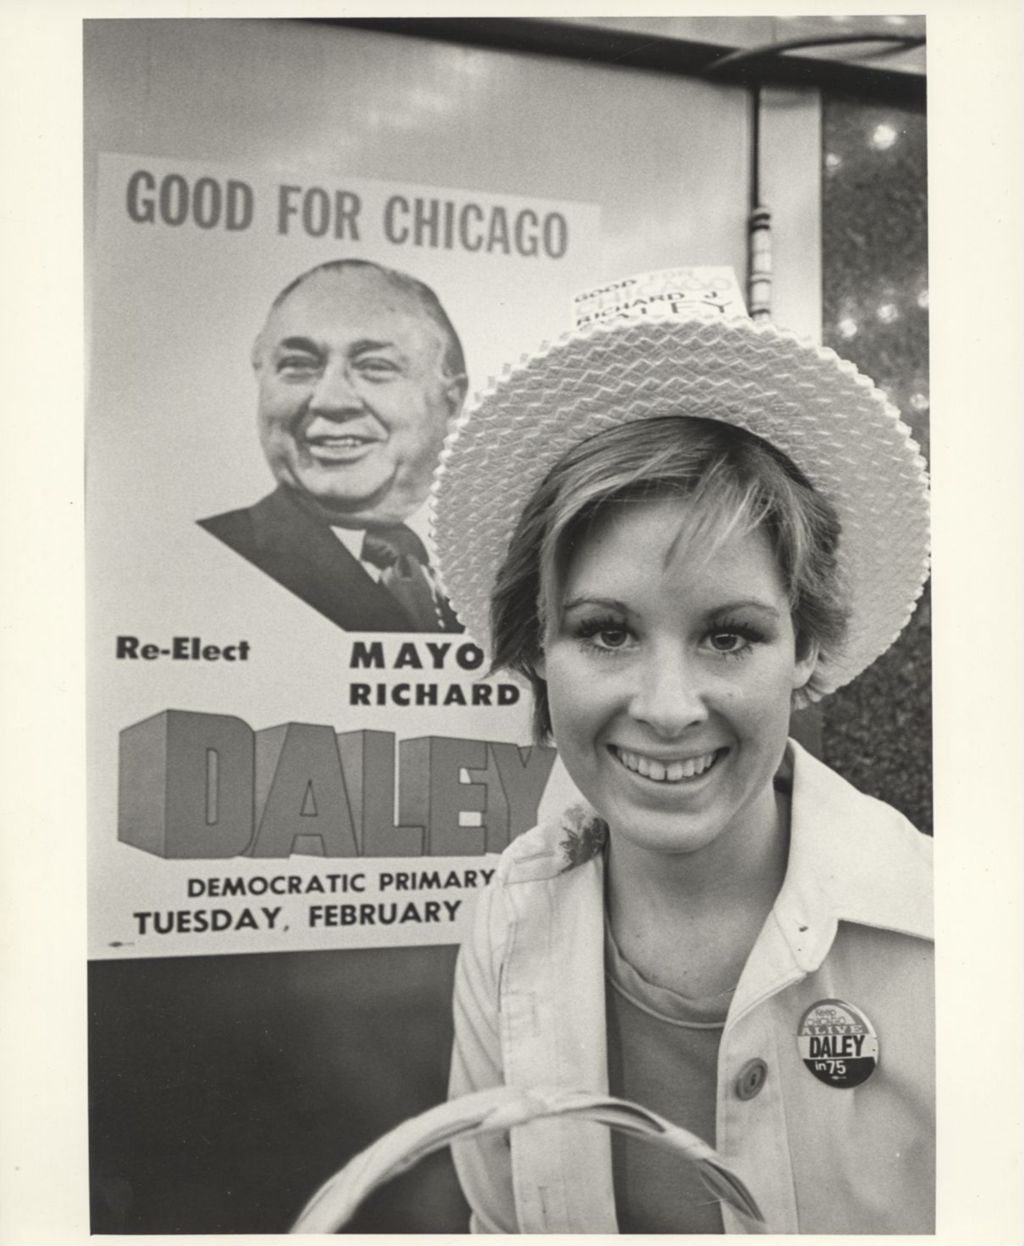 Miniature of Kathy Byrne in front of Richard J. Daley poster